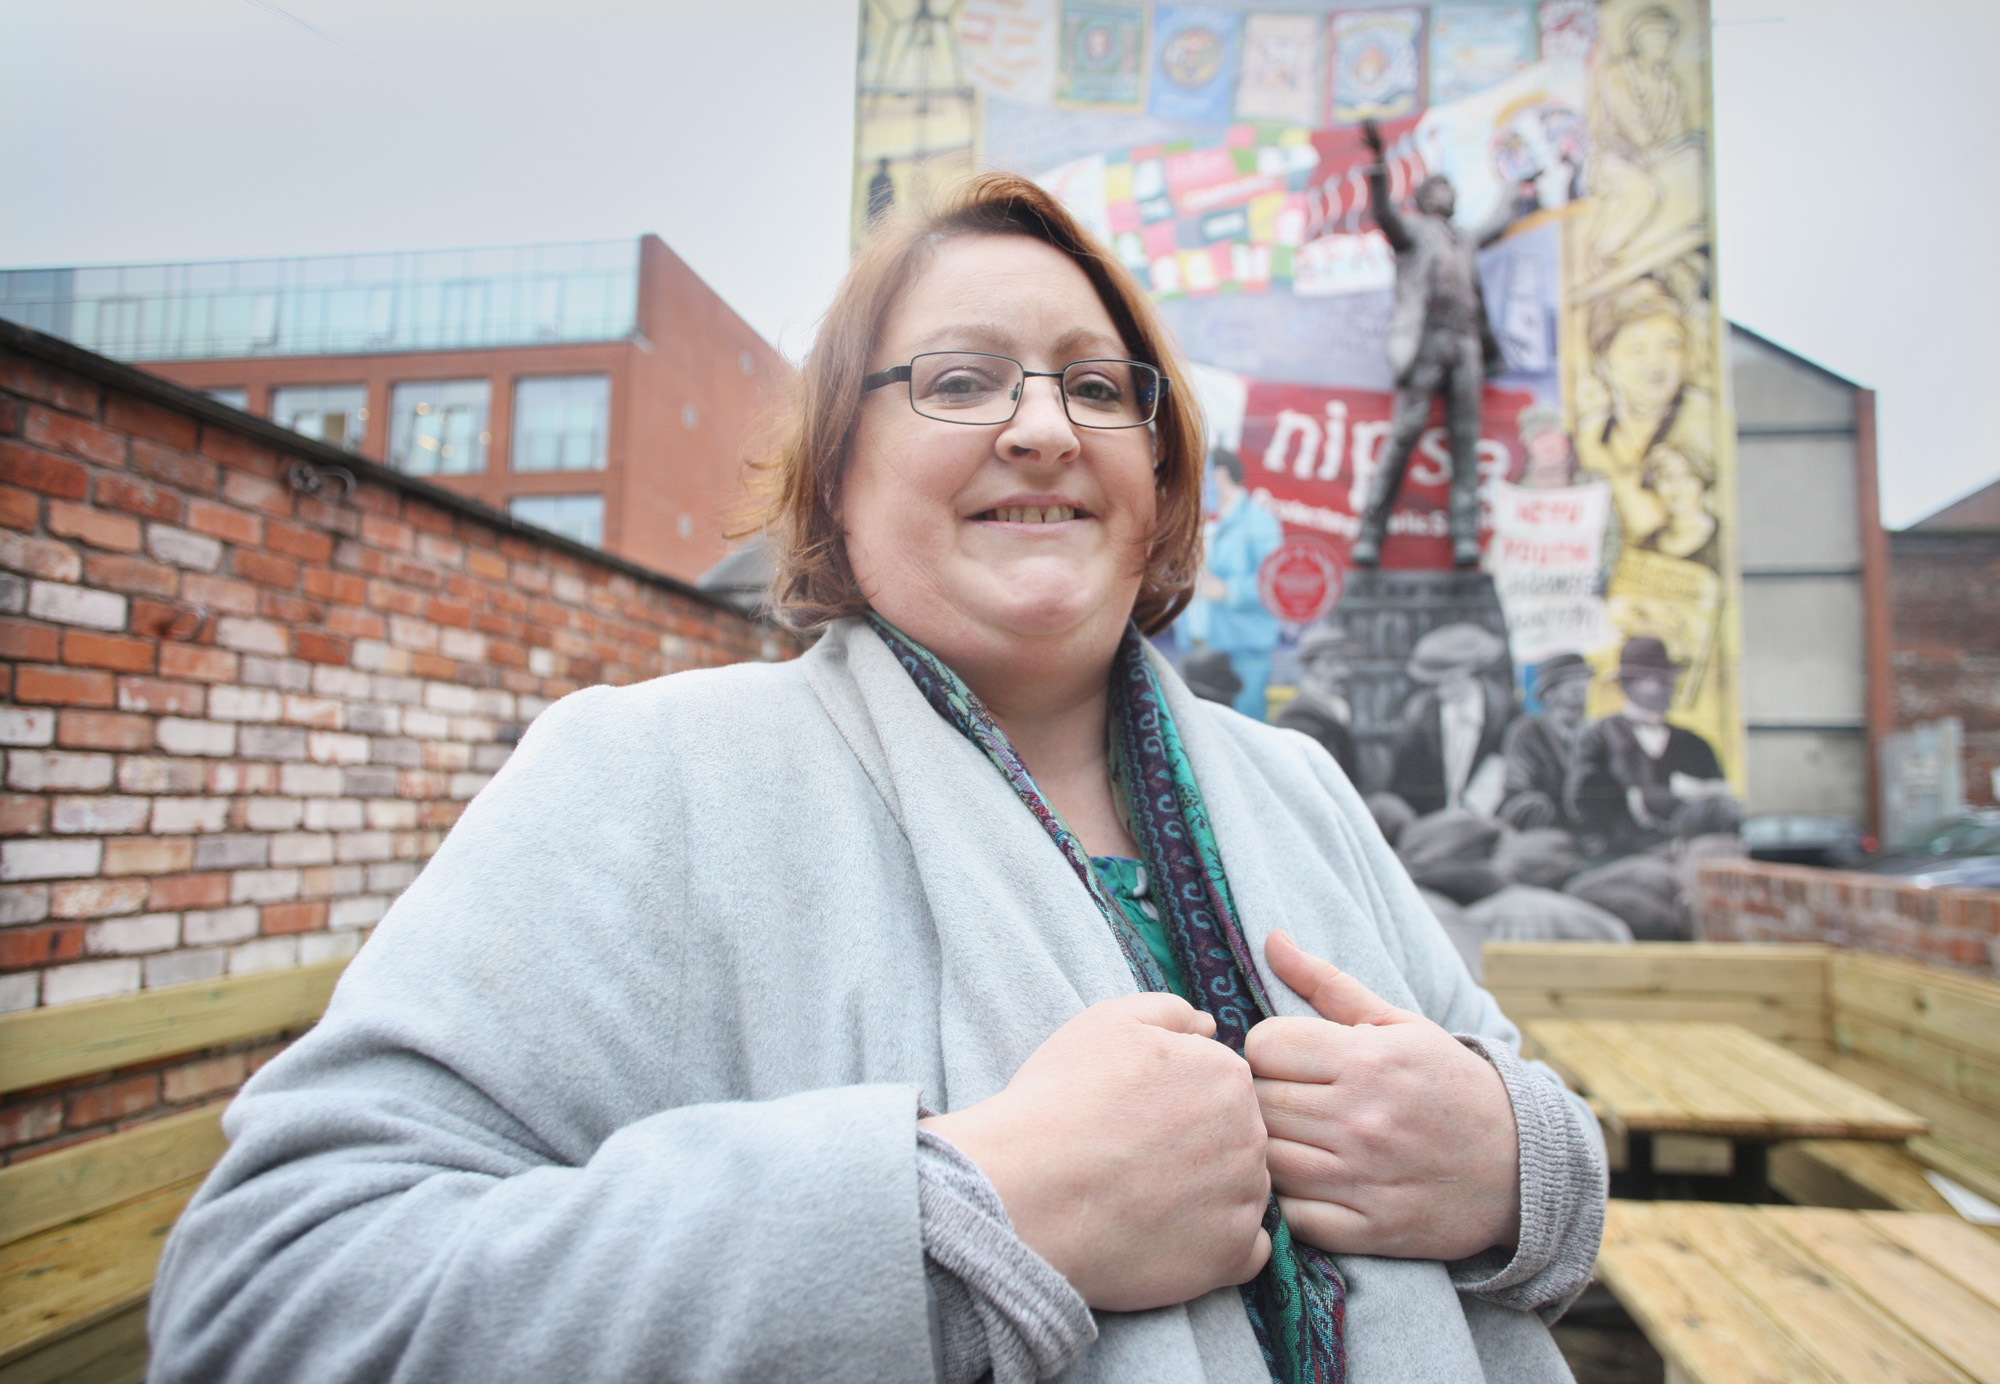 CHARITABLE: Aisling Cartmill, Programmes Manager at Belfast Unemployed Resource Centre